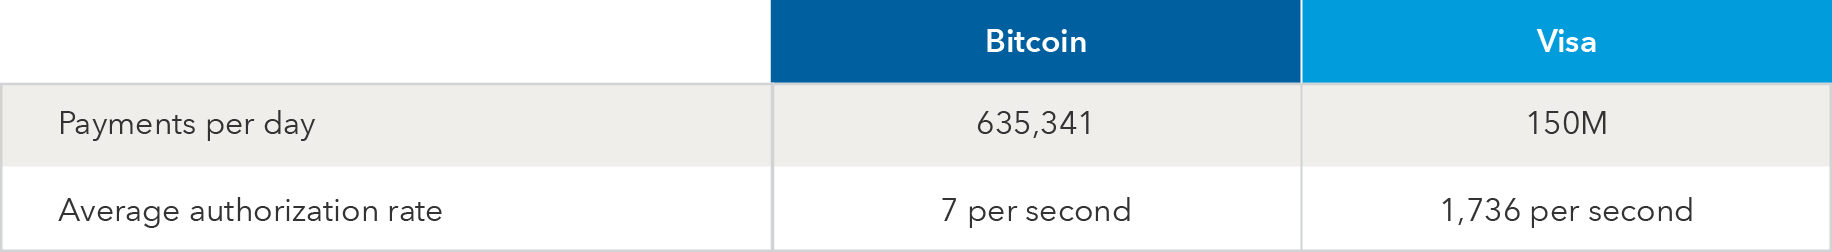 This table shows a comparison between Visa and Bitcoin based on payments per day and the average authorization rate. Visa handles roughly 150 million payments per day at an average authorization rate of 1,736 per second. By contrast, in the past year Bitcoin has averaged 635,341 transactions per day with an average authorization rate of 7 per second. Data as of August 2010 for Visa. Data as of March 23, 2021 for Bitcoin.